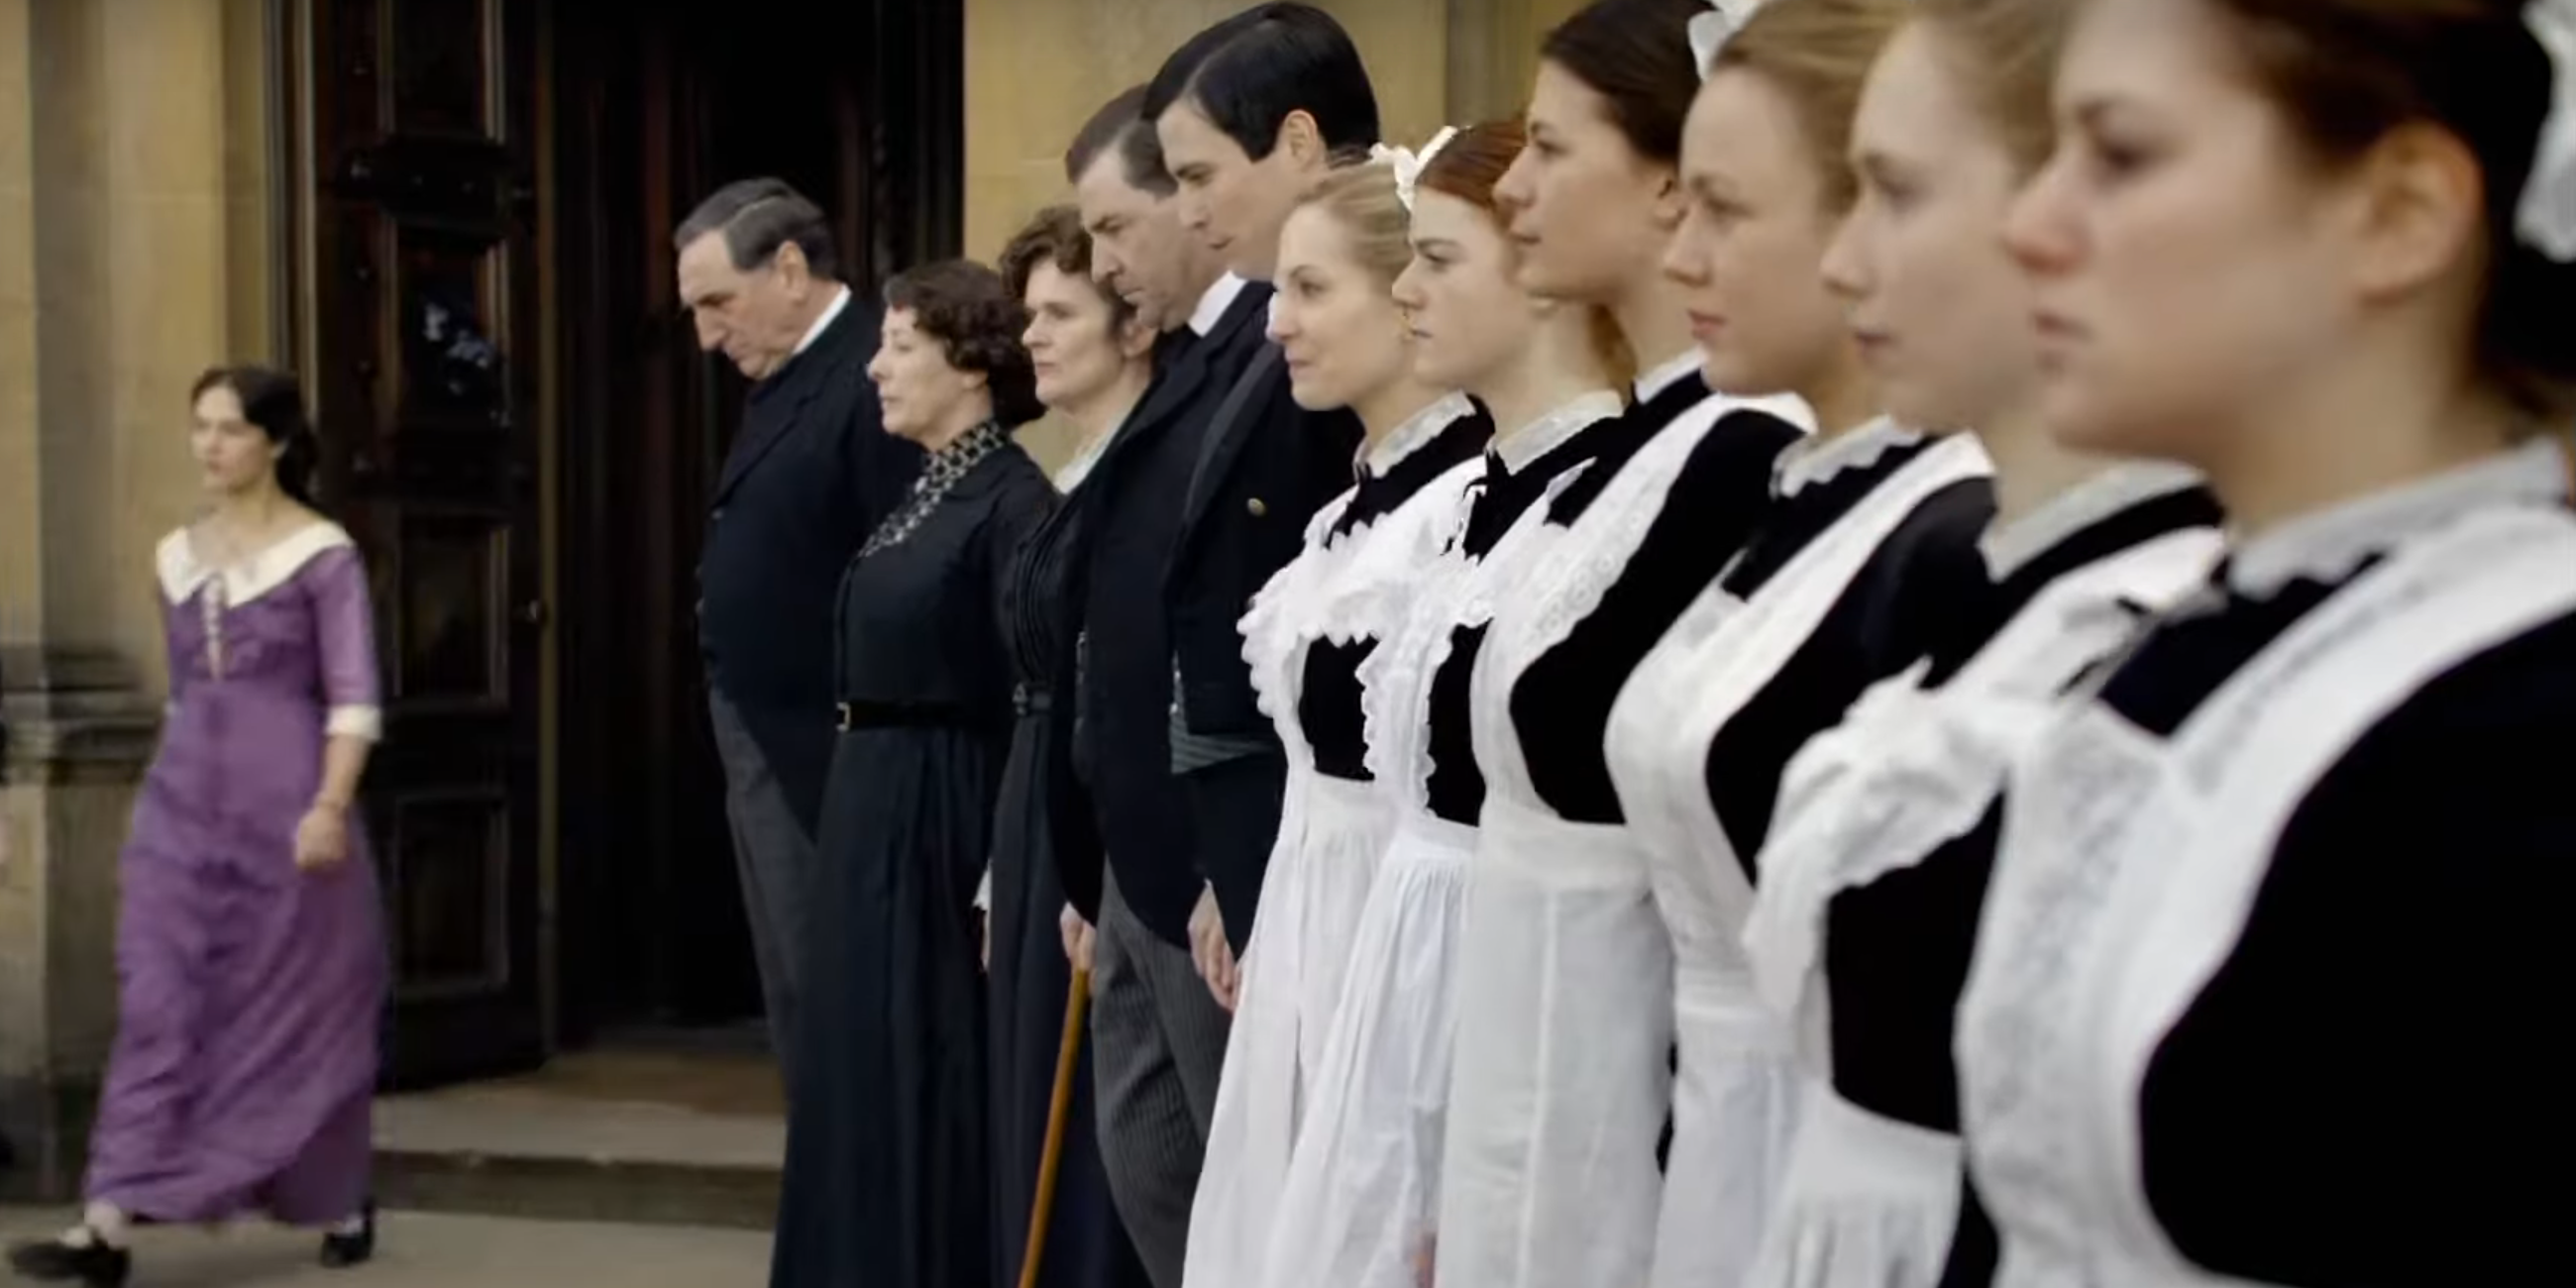 Servants lined up in front of the house in Downton Abbey